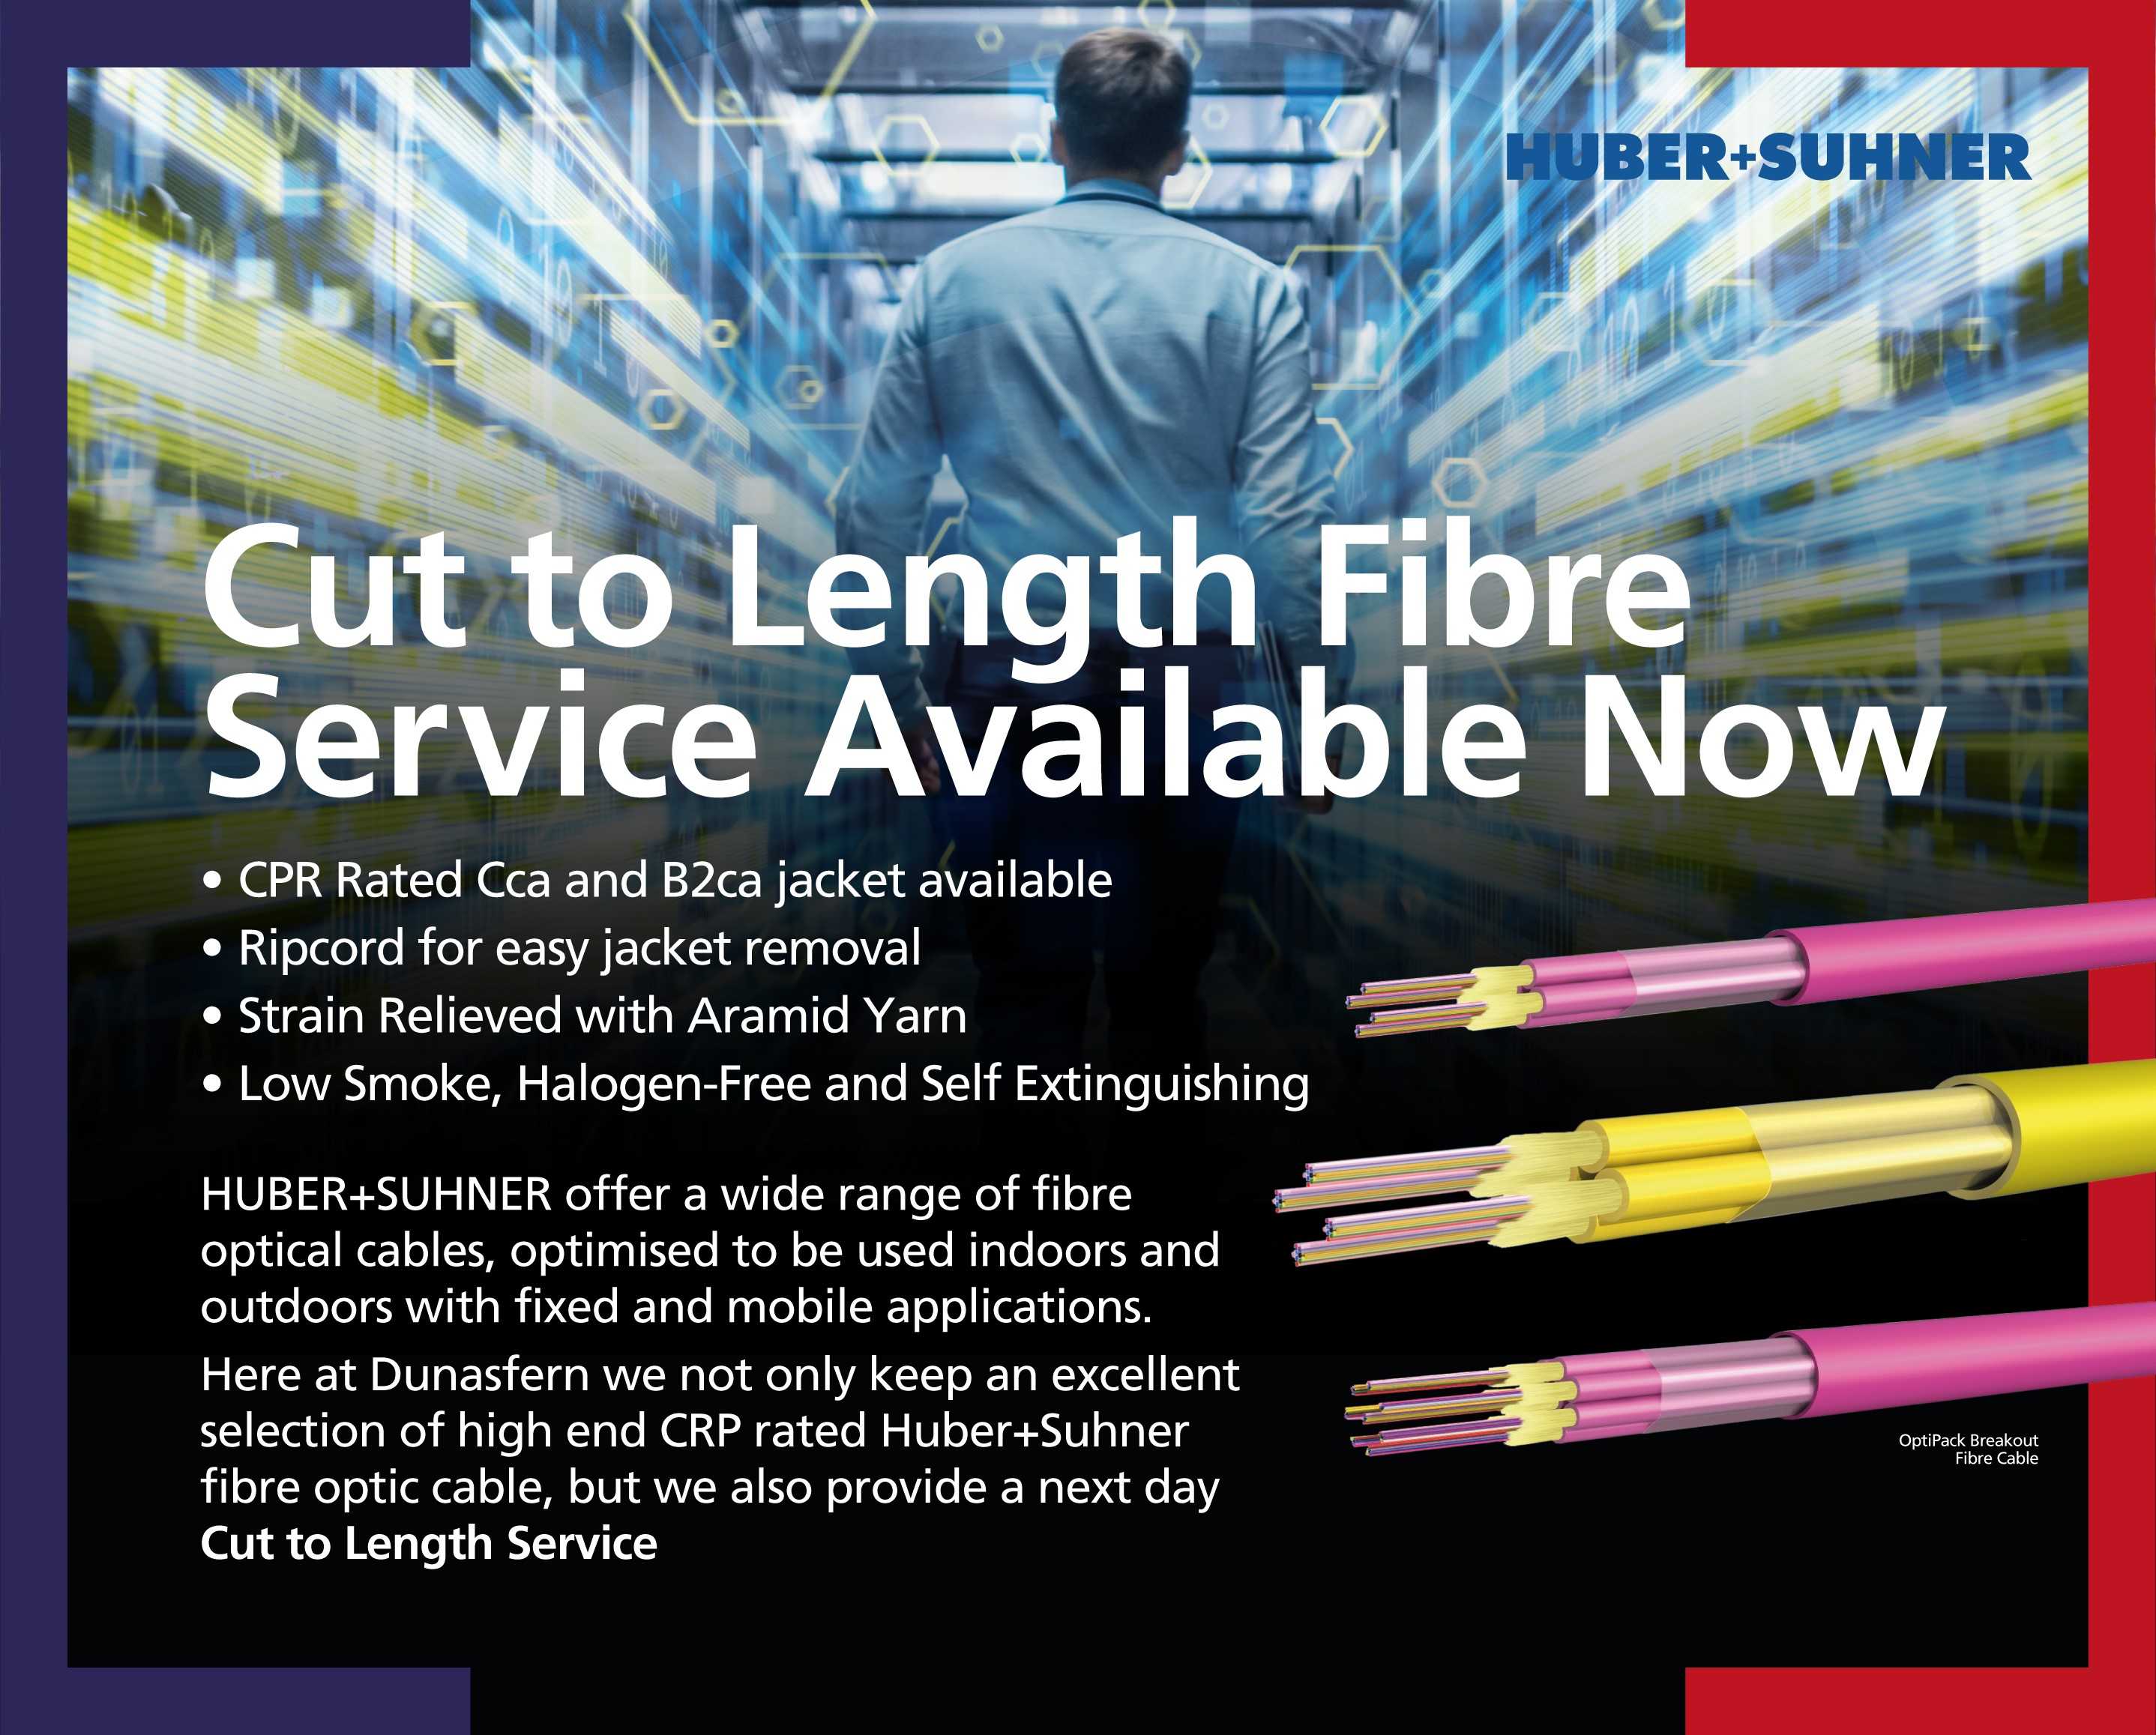 Huber + Suhner Cut to Length Fibre Service available now